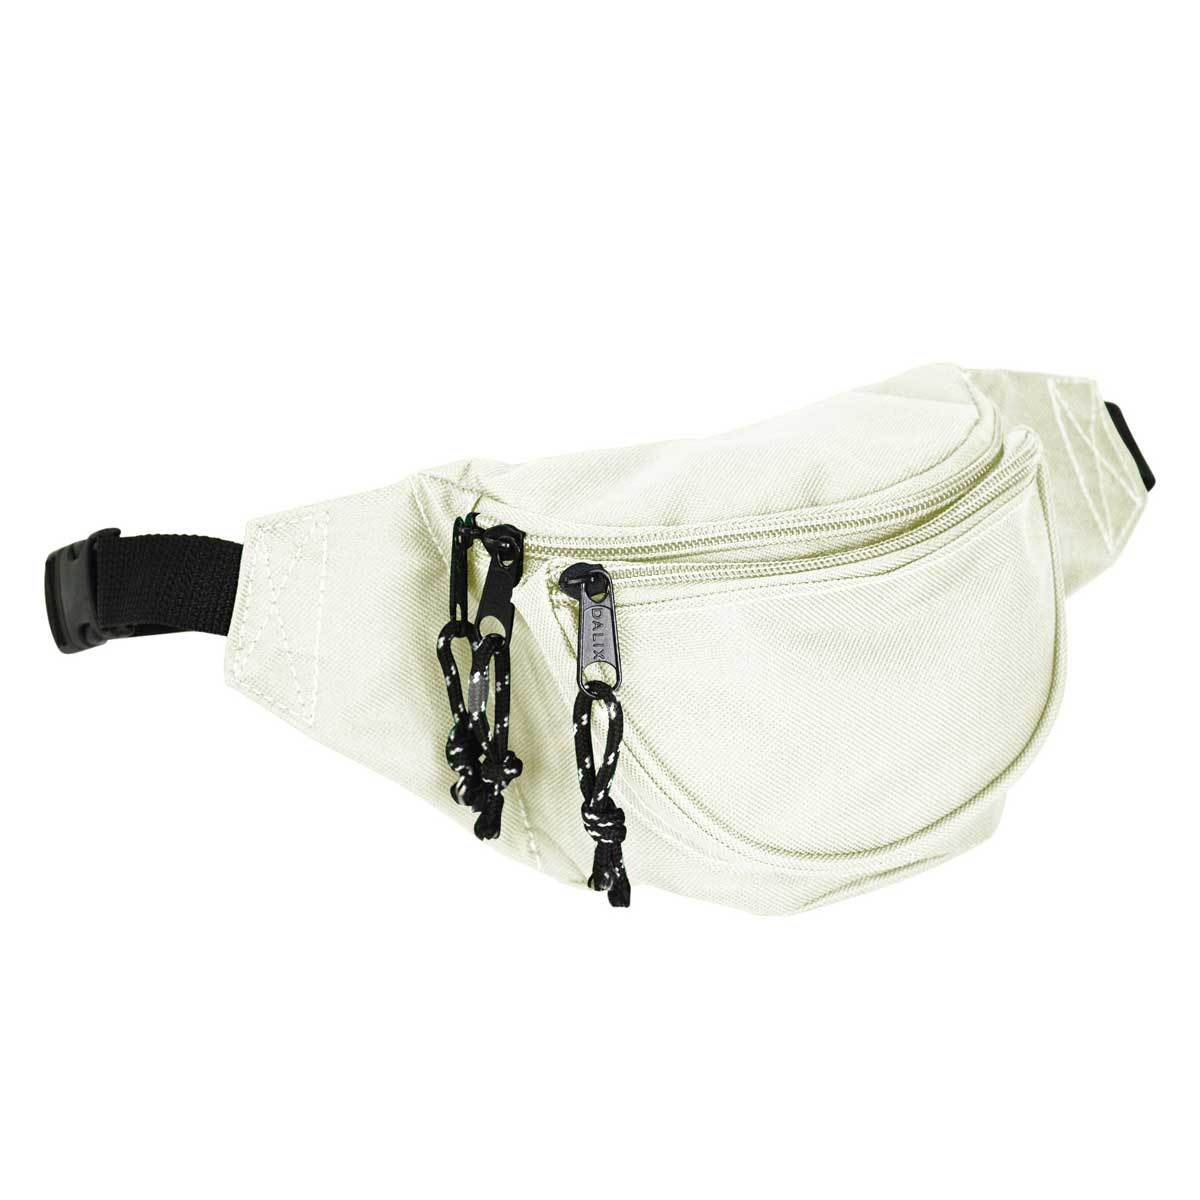 DALIX Fanny Pack w/ 3 Pockets Traveling Concealment Pouch Airport Money Bag FP-001 Fanny Packs DALIX Nude 